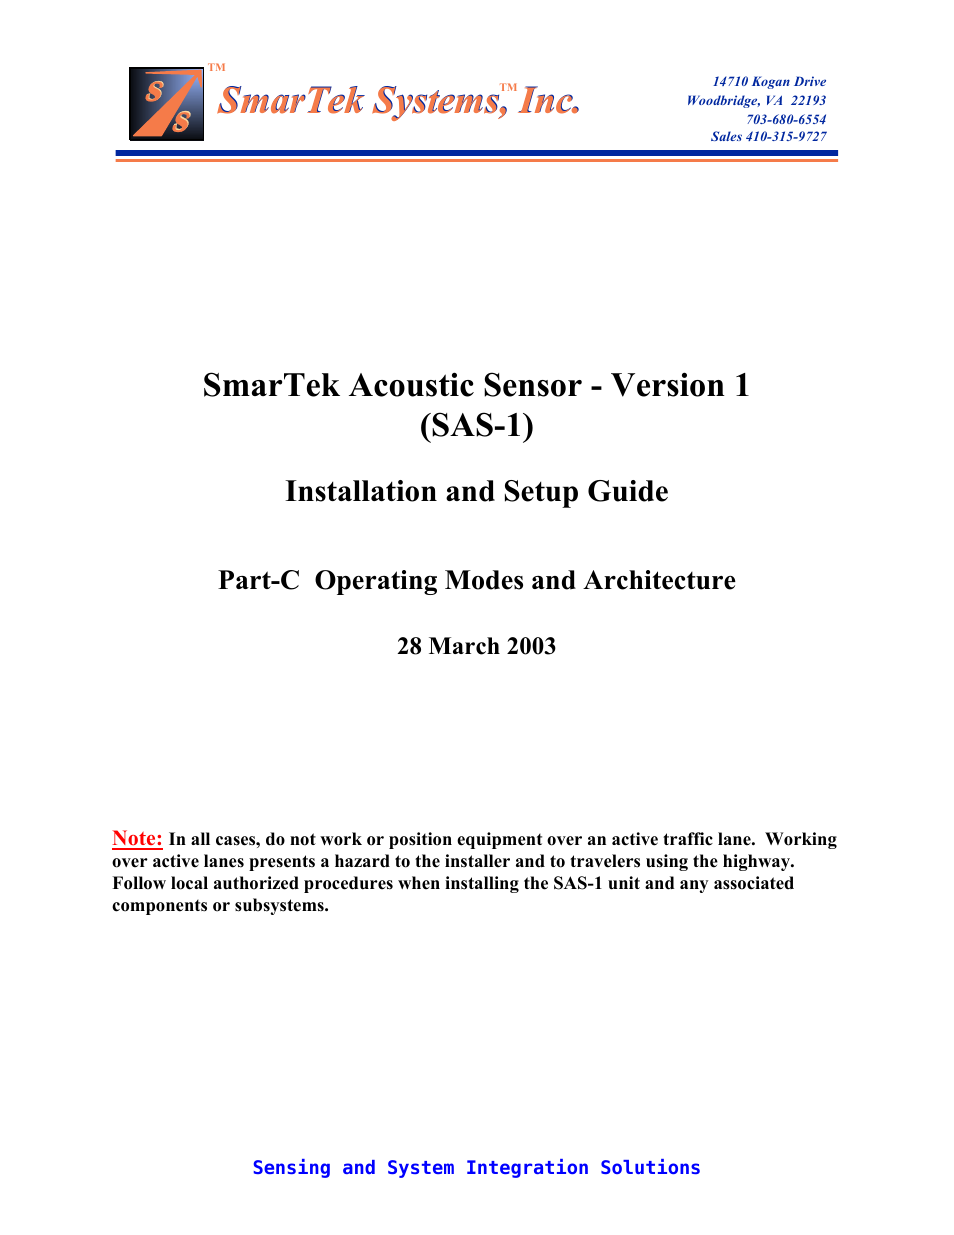 SAS-1 Operating Modes and Architecture